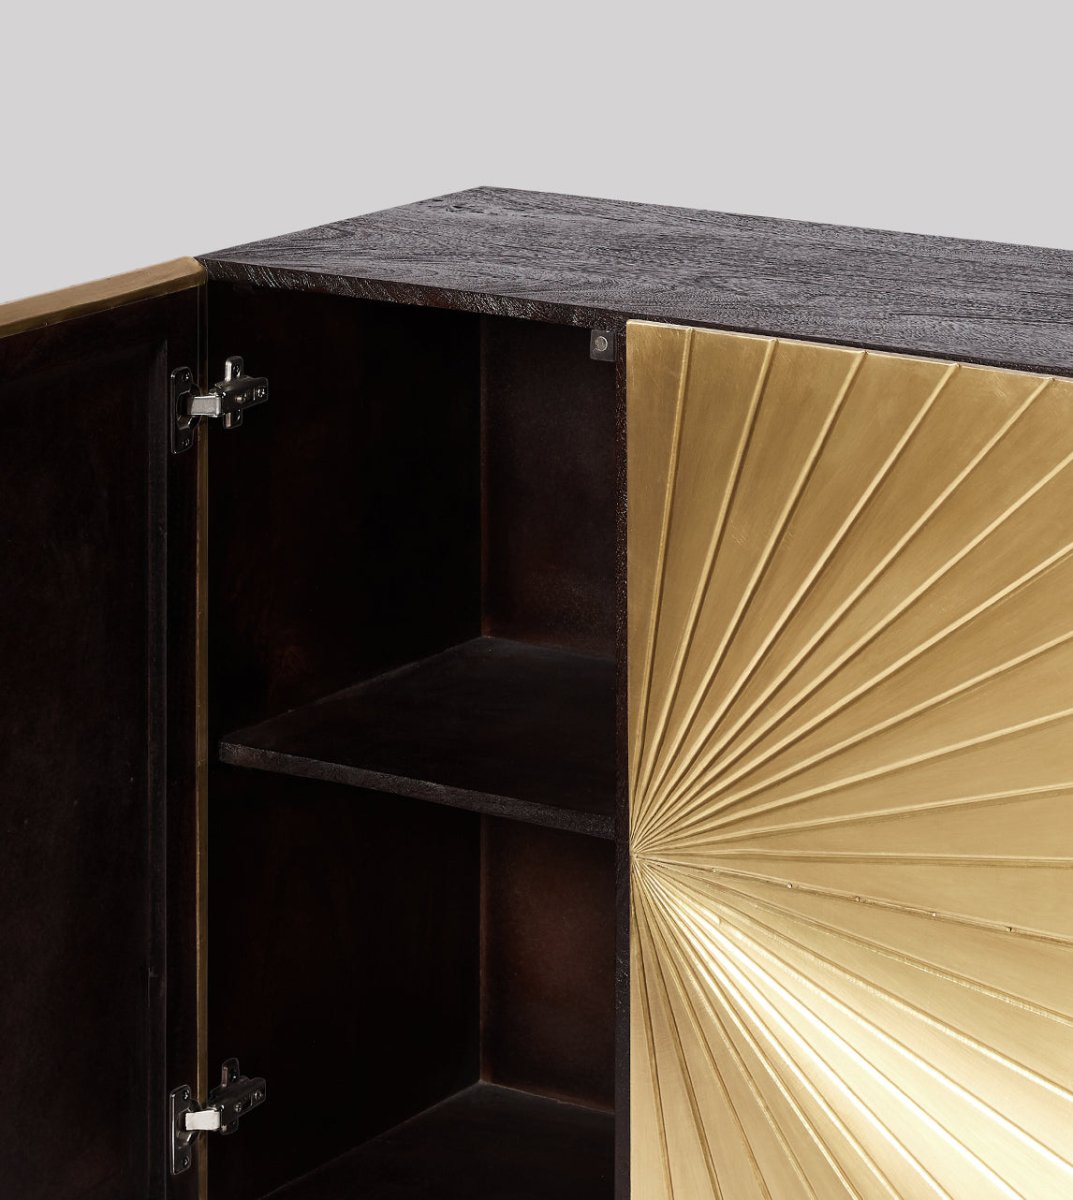 Hand Embossed Brass Cabinet | Wooden Golden Metal Cabinetry Furniture Cabinet - Bone Inlay Furnitures